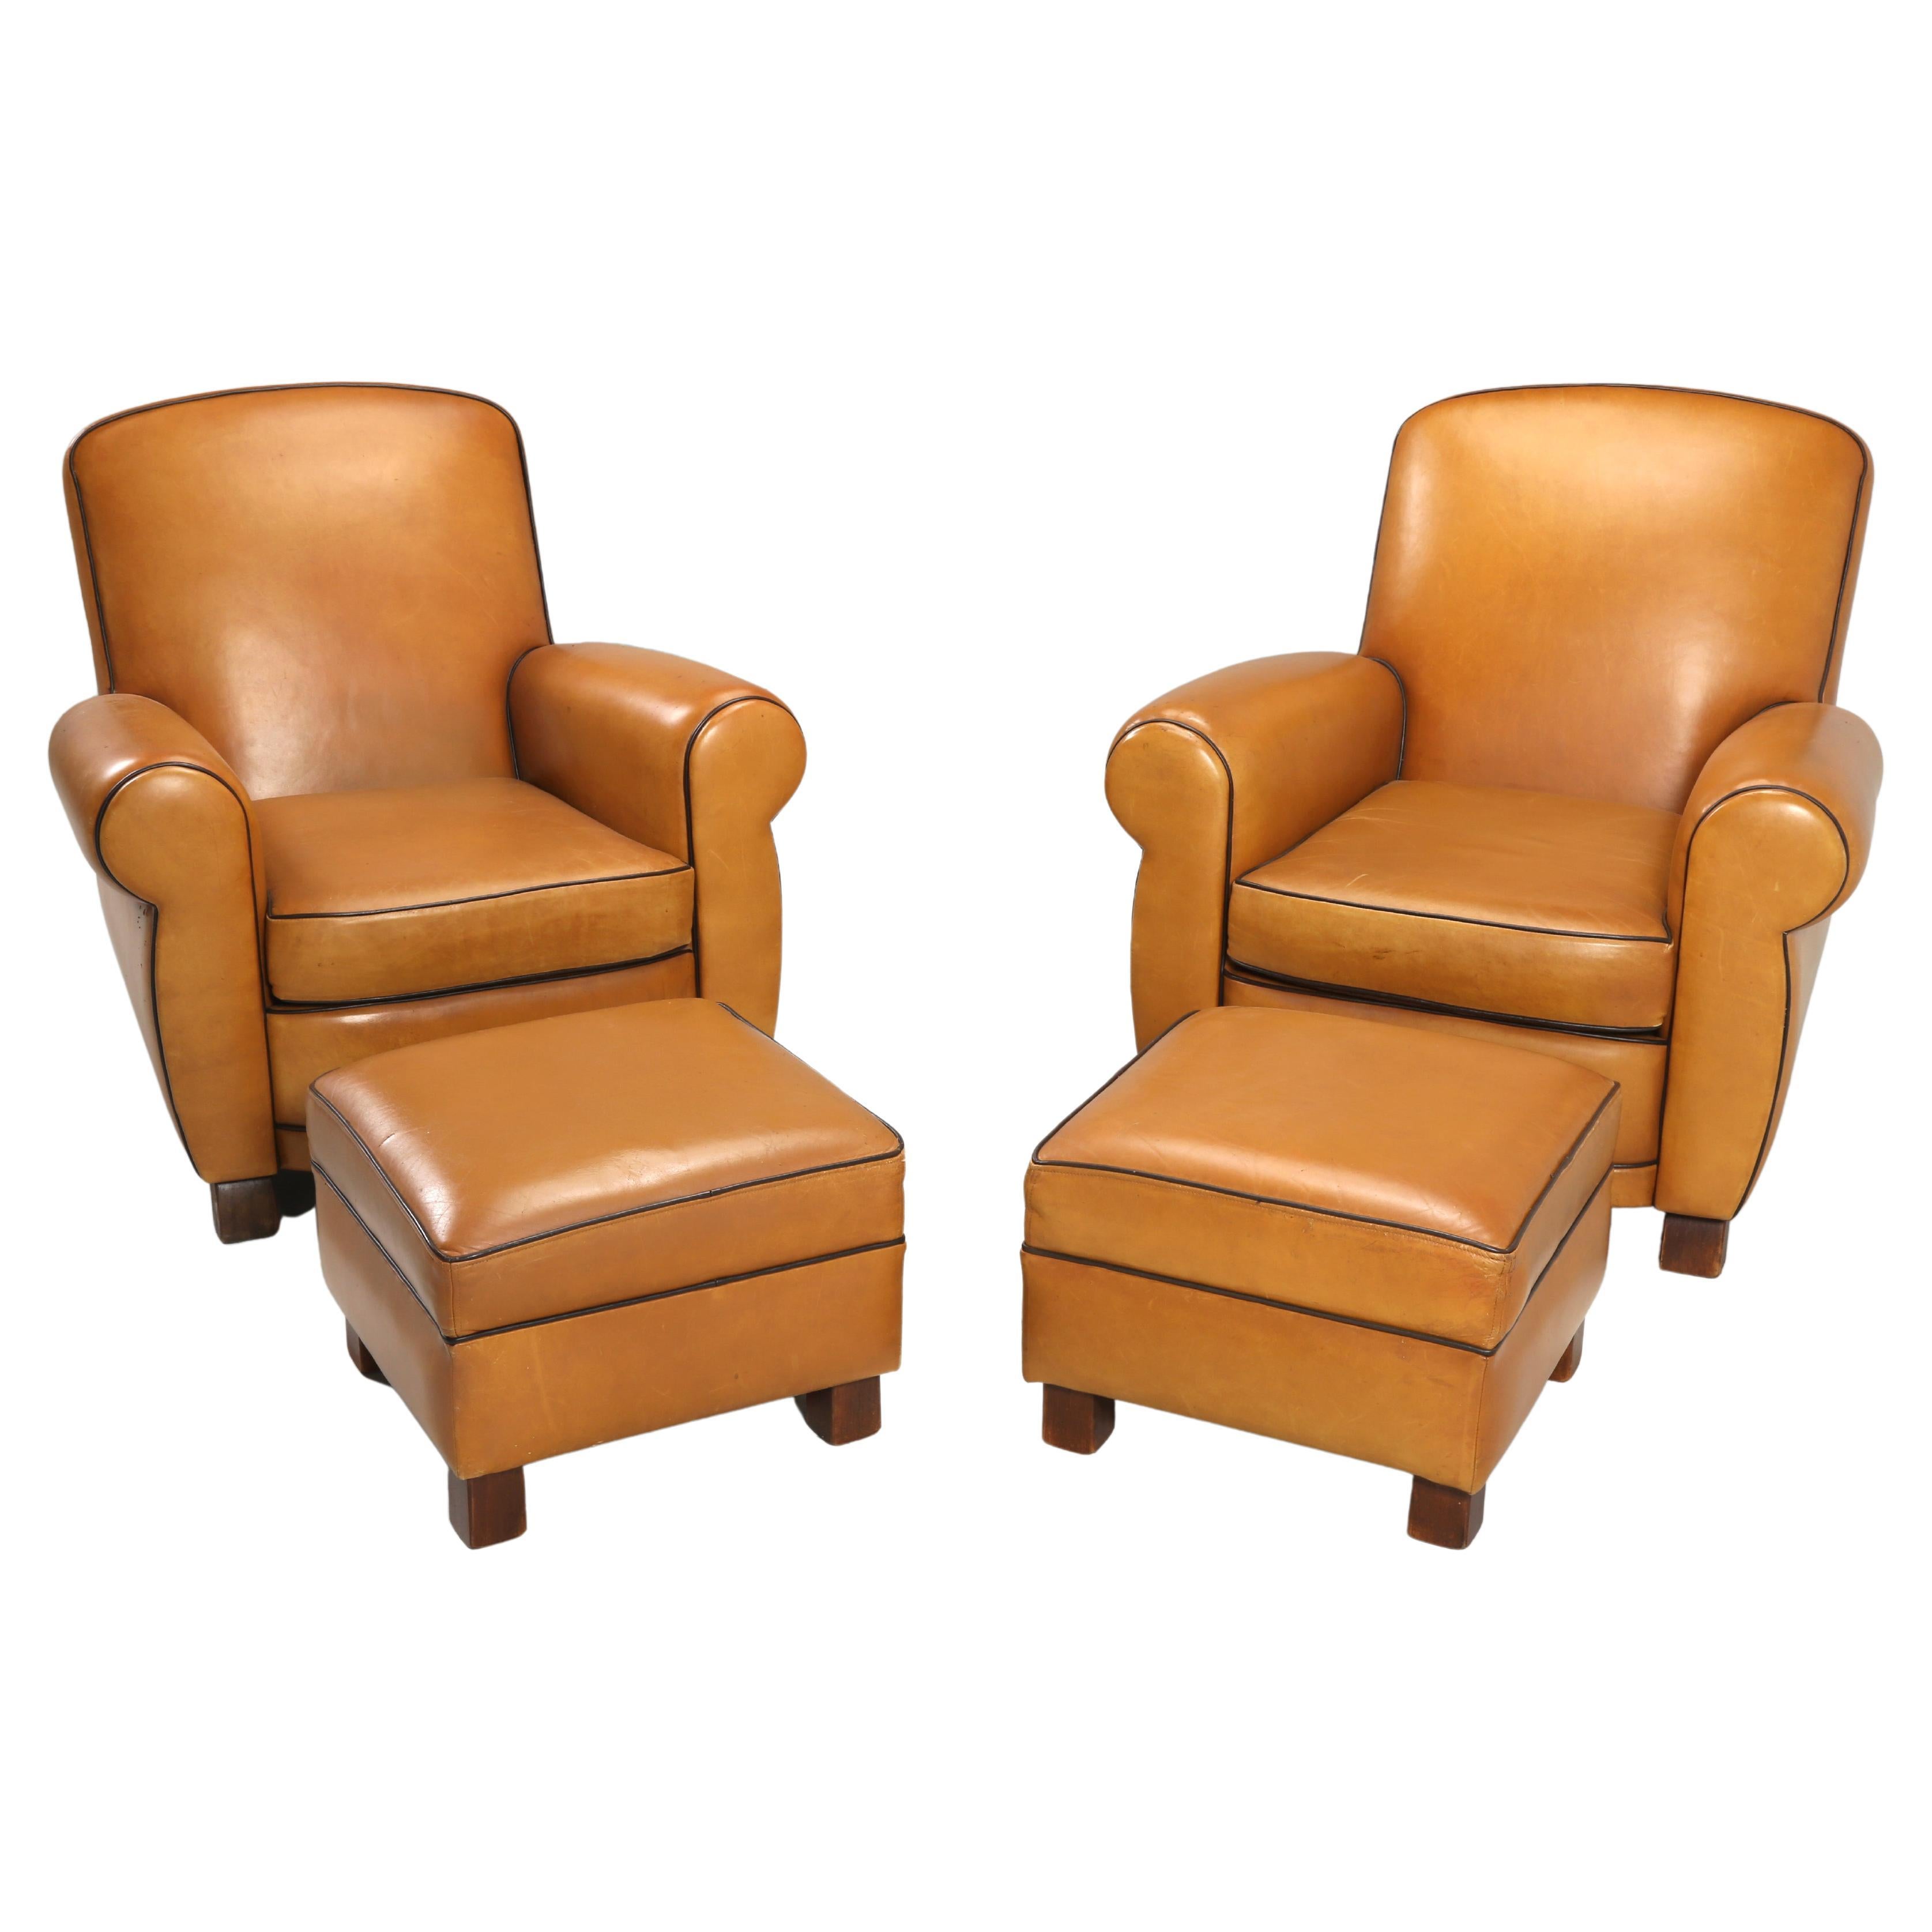 French Leather Club Chairs with Ottomans Restored Internally, Original Leather